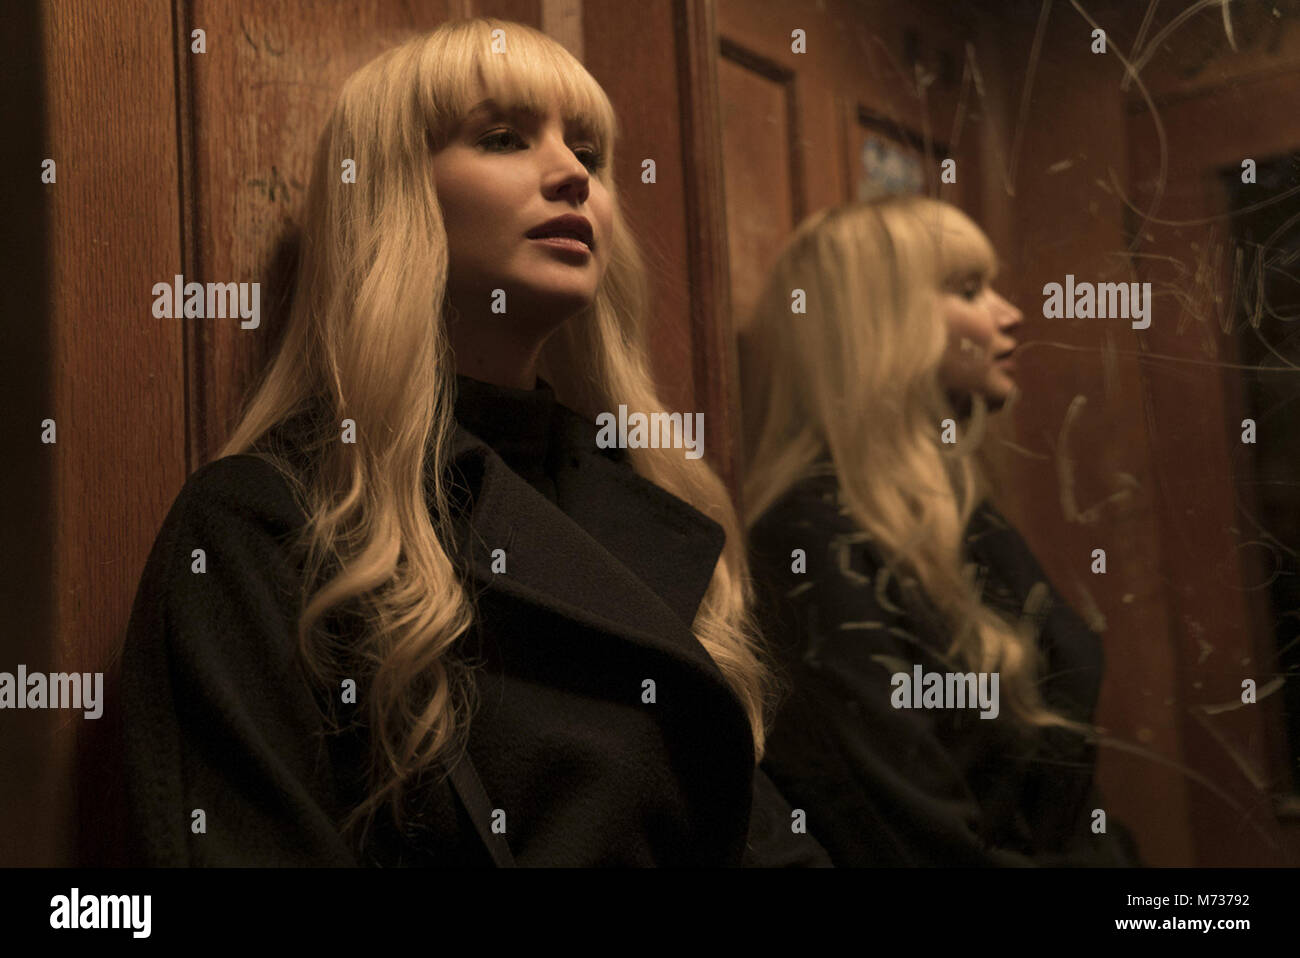 RED SPARROW (2018) Jennifer Lawrence Francis Lawrence (DIR) 20 TH CENTURY FOX/MOVIESTORE COLLECTION LTD. Stockfoto